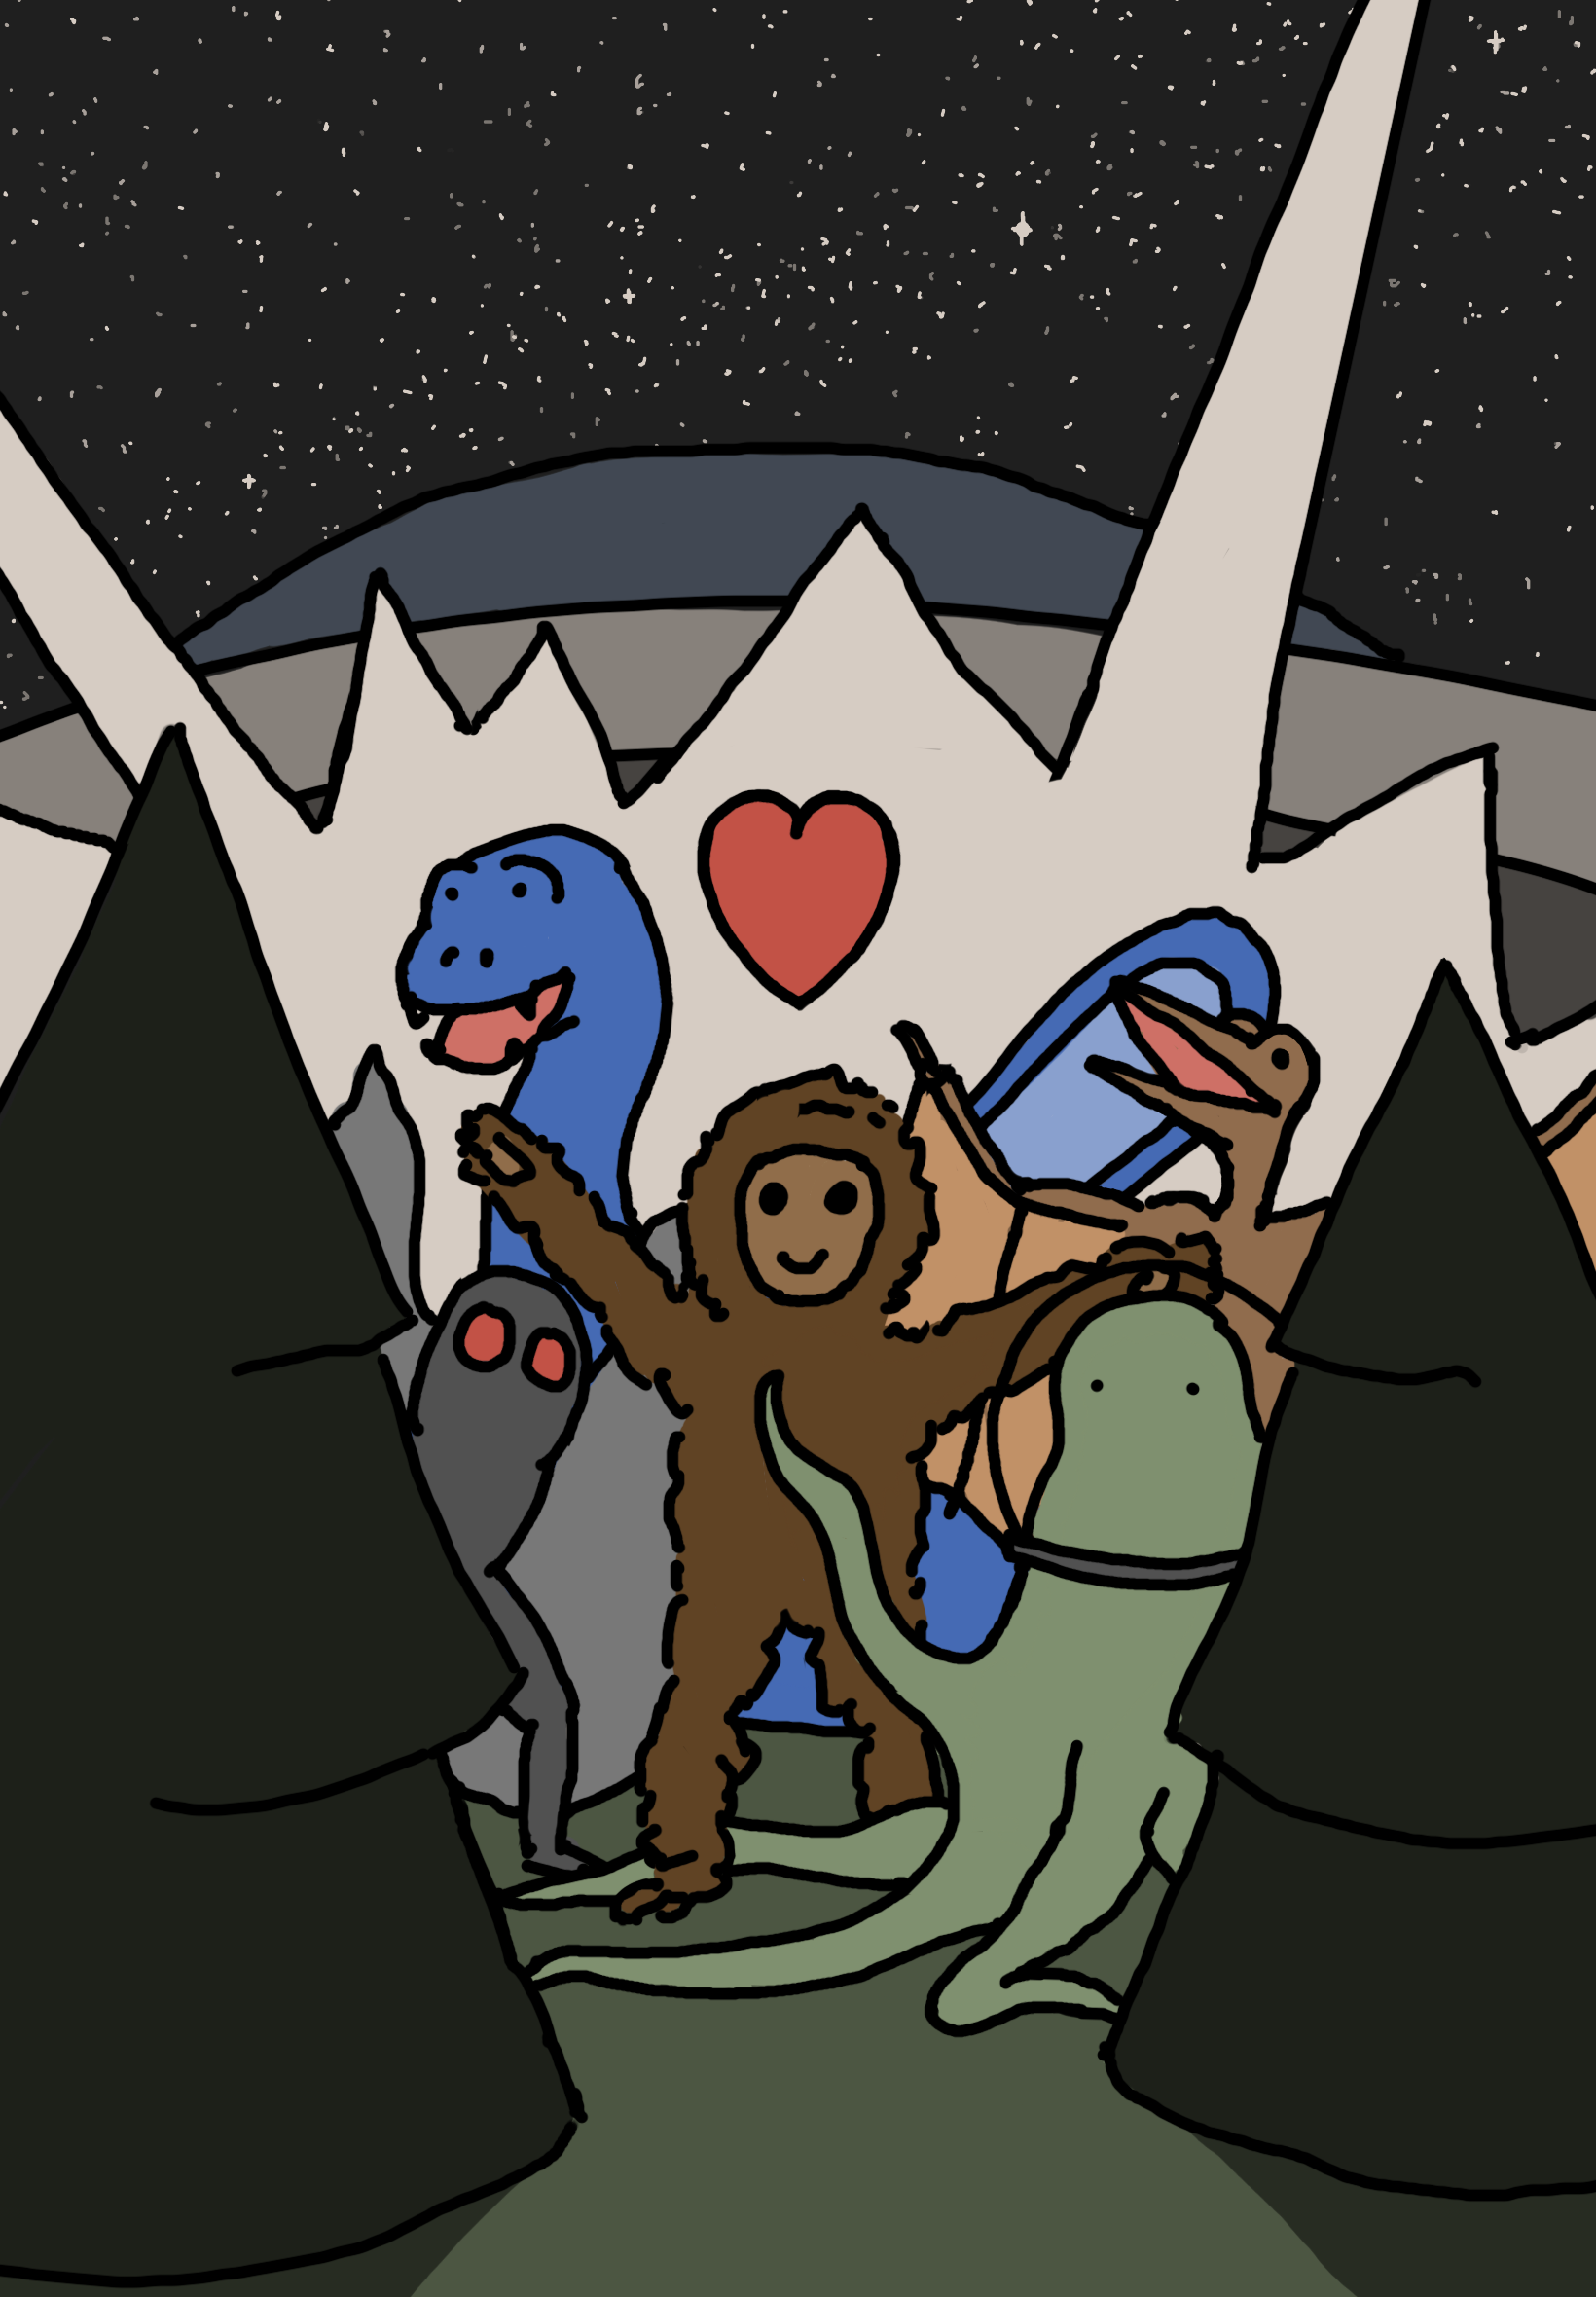 Simple poster used in the game UFO Chaser. A group of various cryptid creatures in a pine forest, with their arms up and heart over their heads <3.